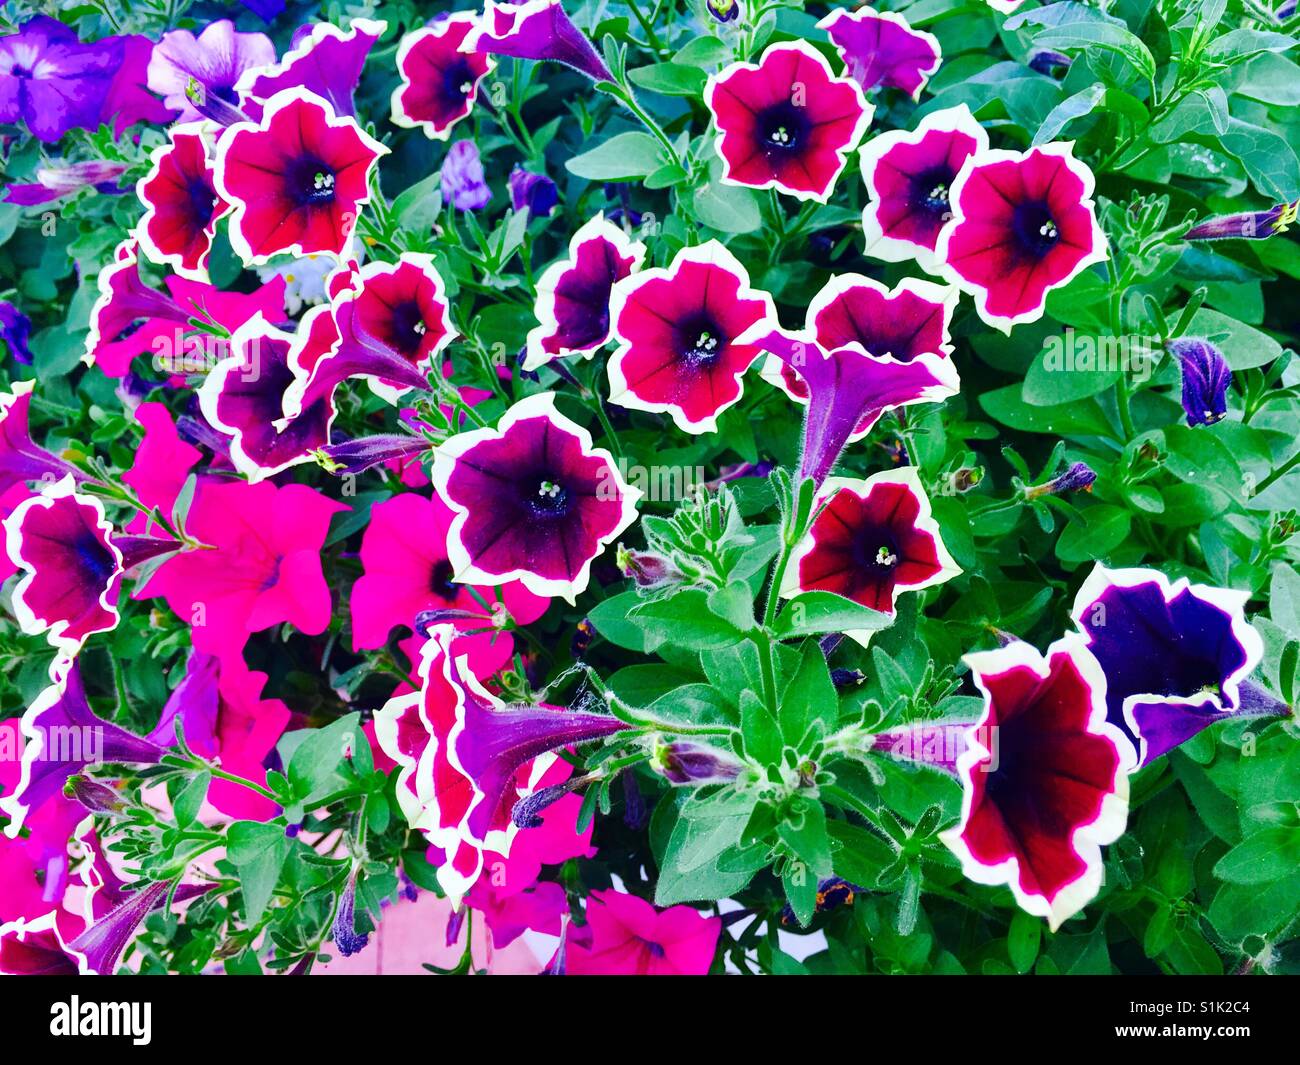 Can can picotee velvet petunia flowers against green leaves and violet flowers Stock Photo